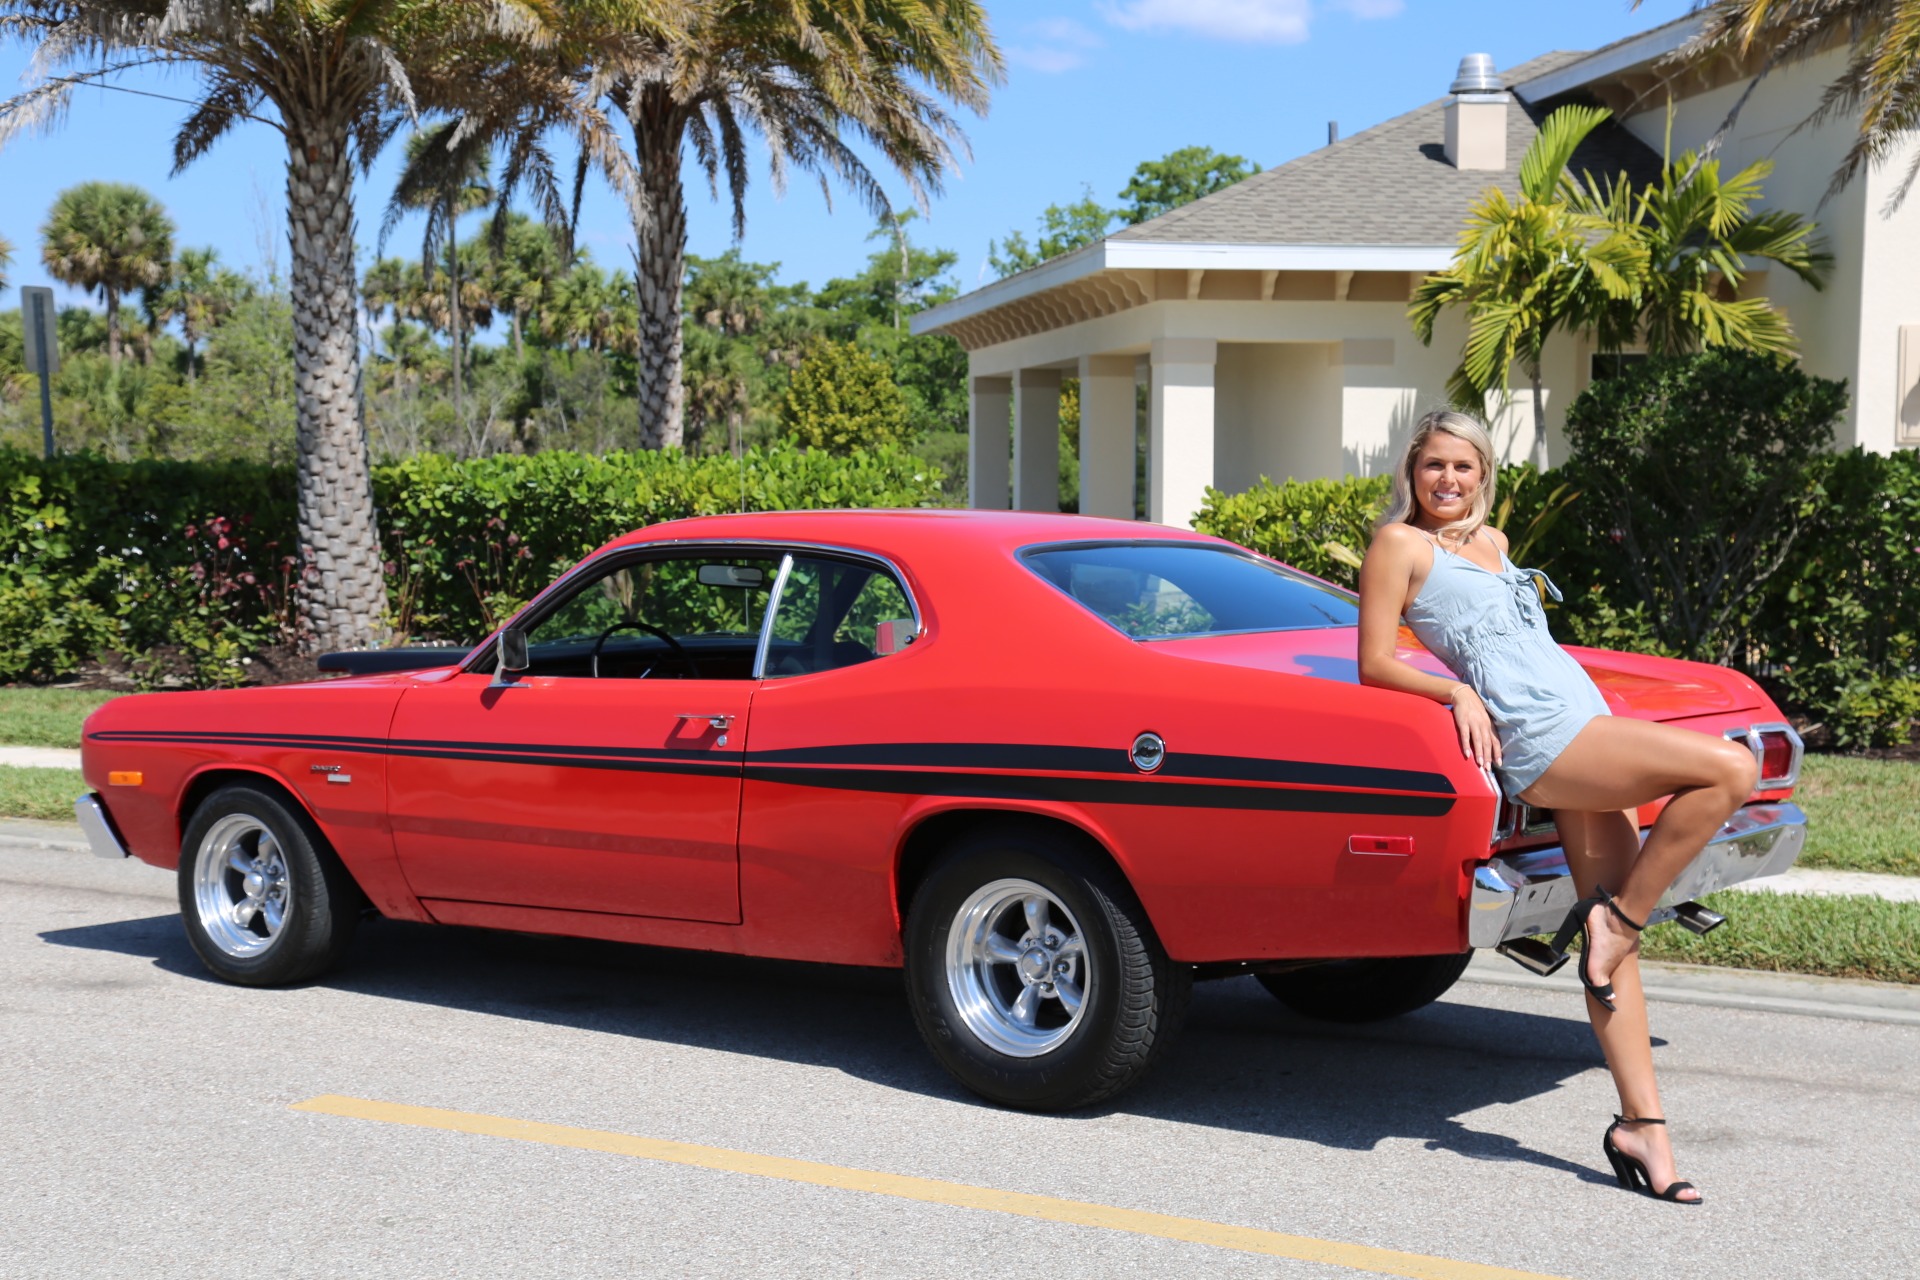 Used 1973 Dodge Dart Dart V8 Auto for sale Sold at Muscle Cars for Sale Inc. in Fort Myers FL 33912 5